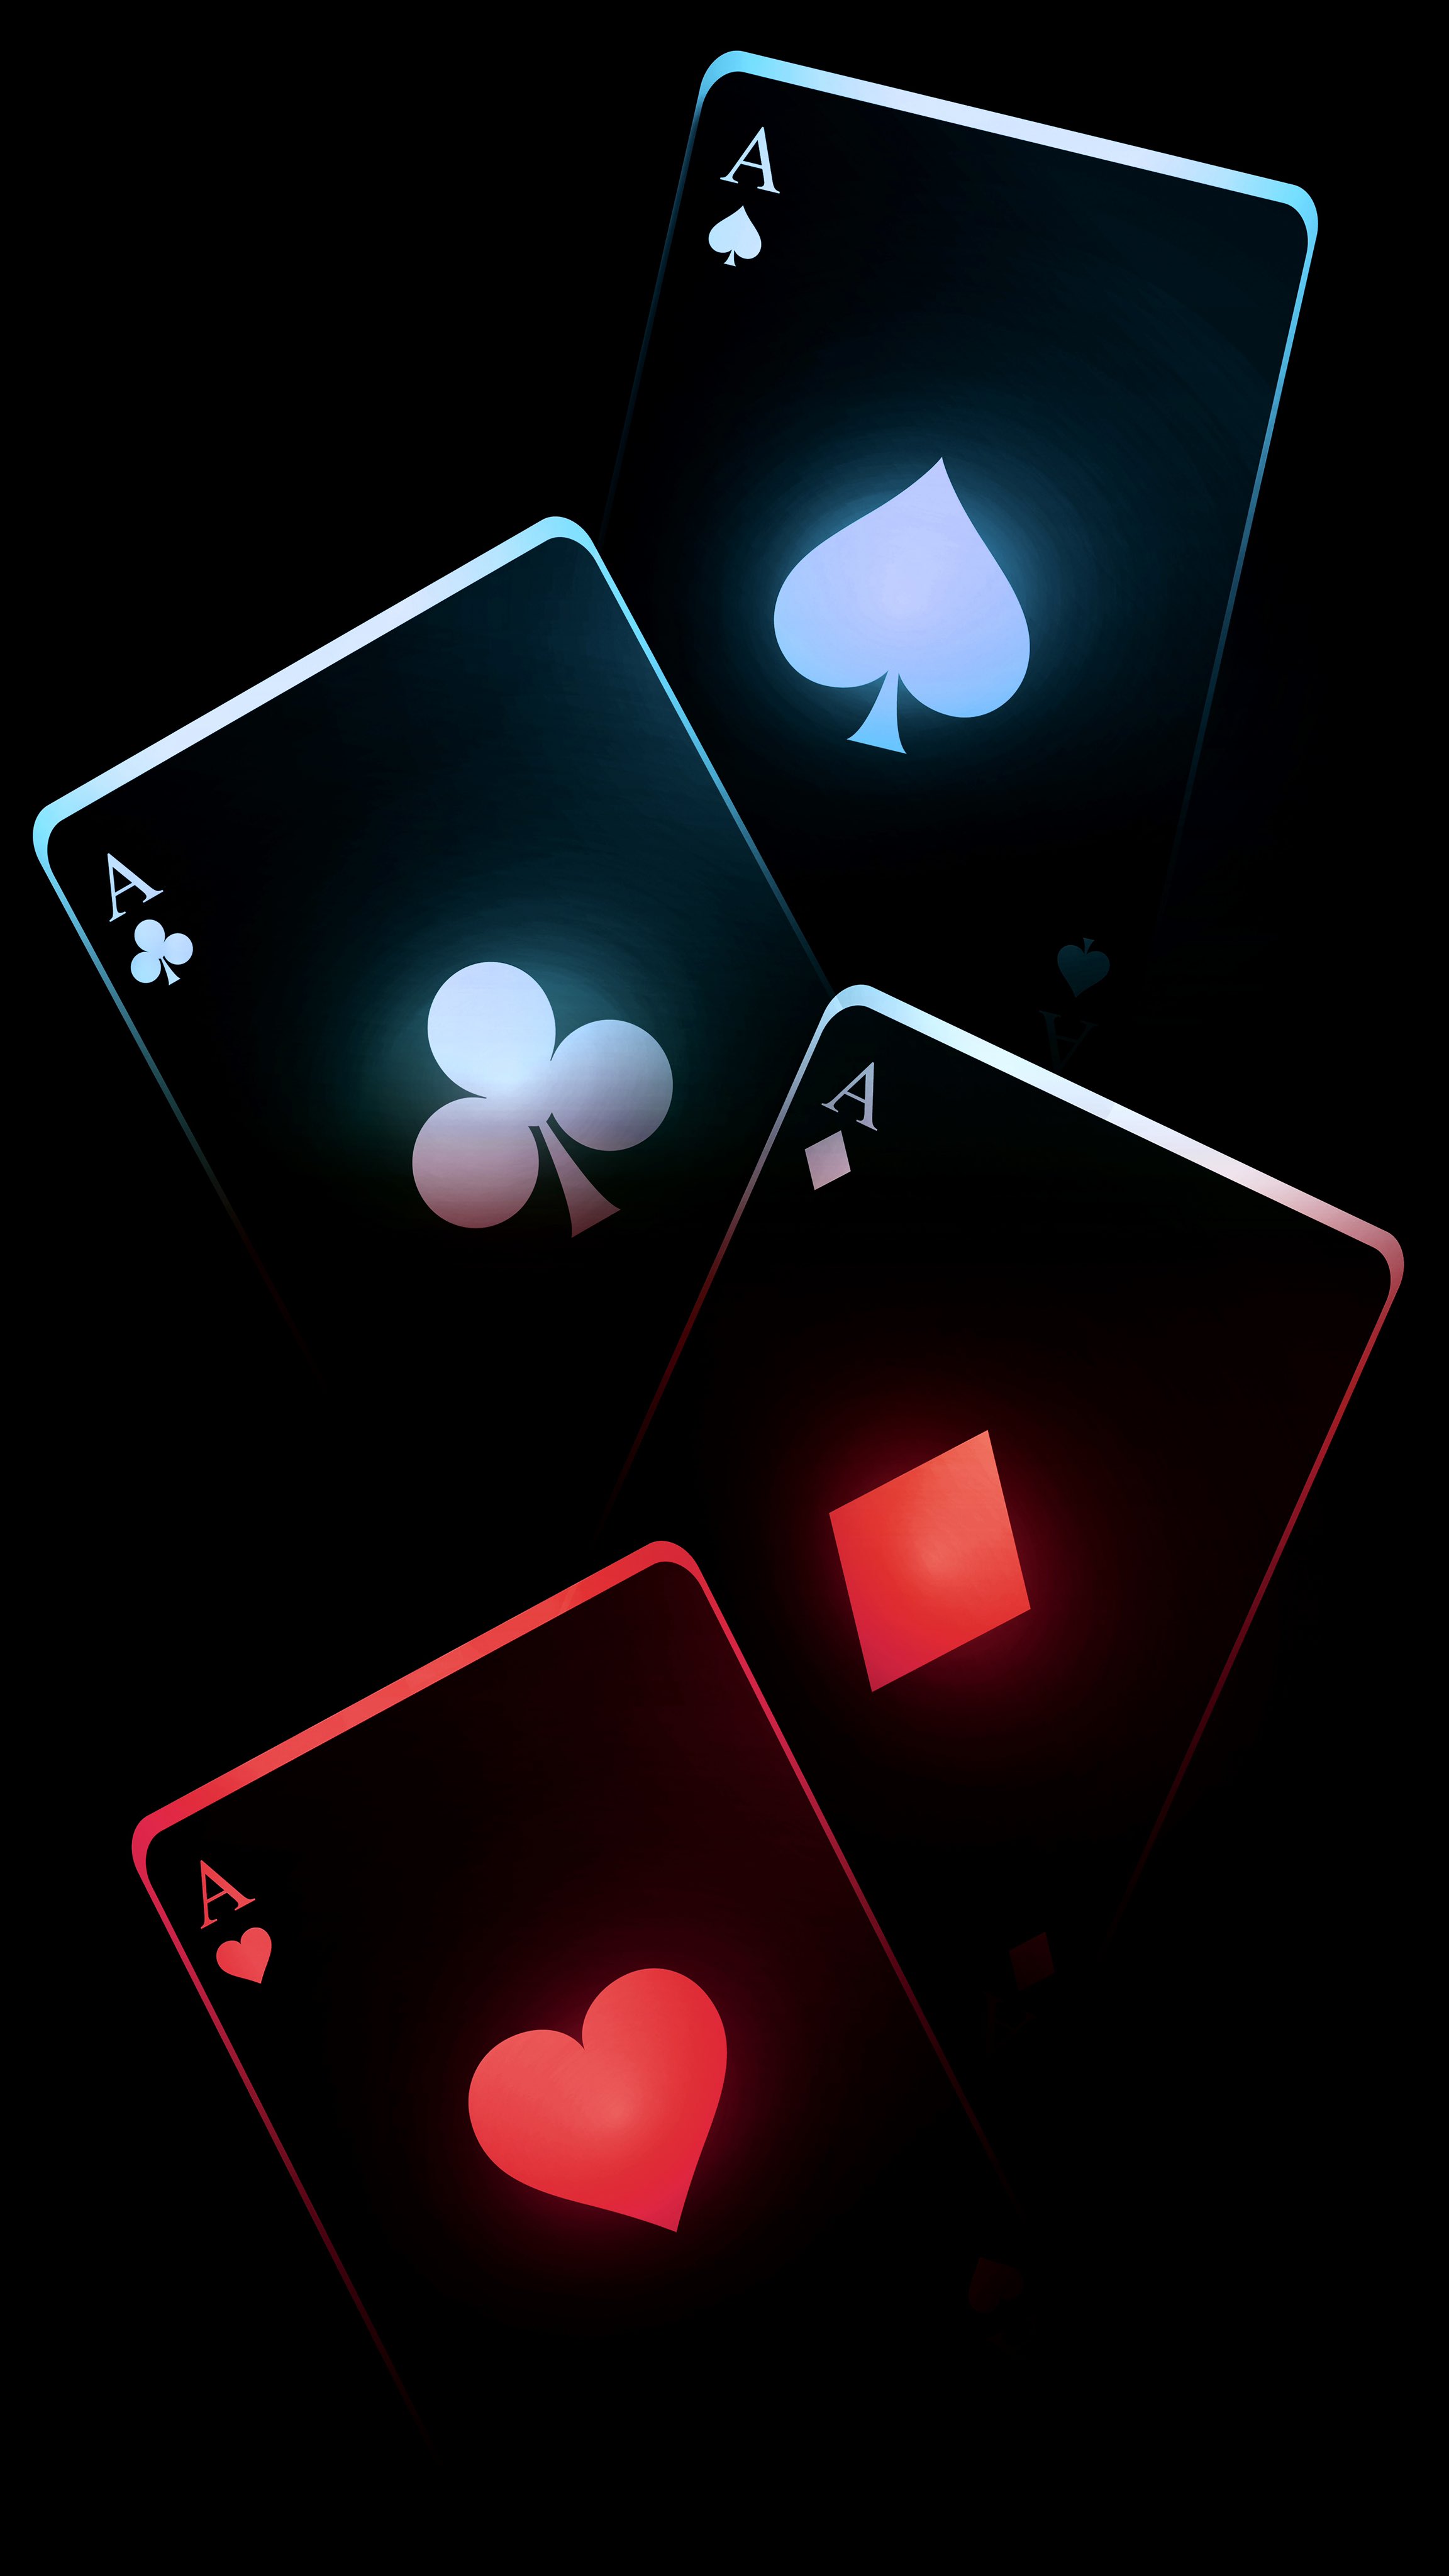 Ace Of Spades IPhone Wallpaper HD  IPhone Wallpapers  iPhone Wallpapers